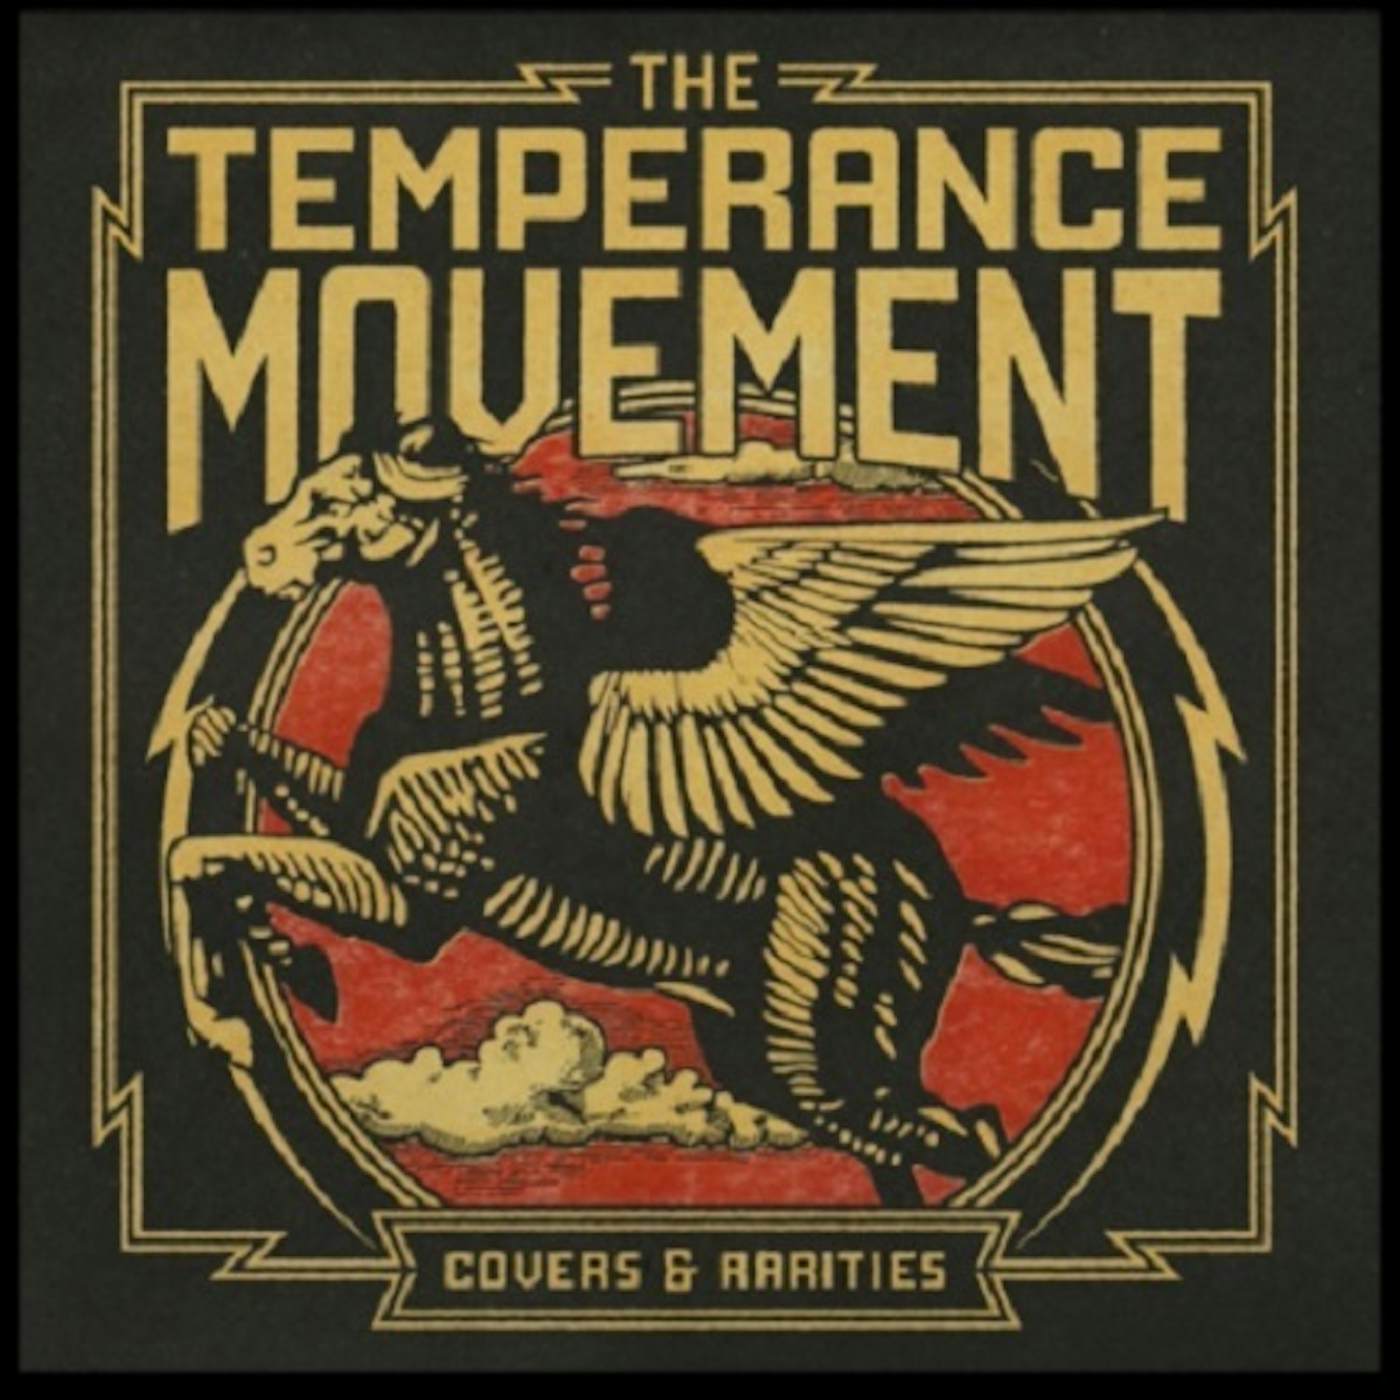 The Temperance Movement Covers & Rarities CD